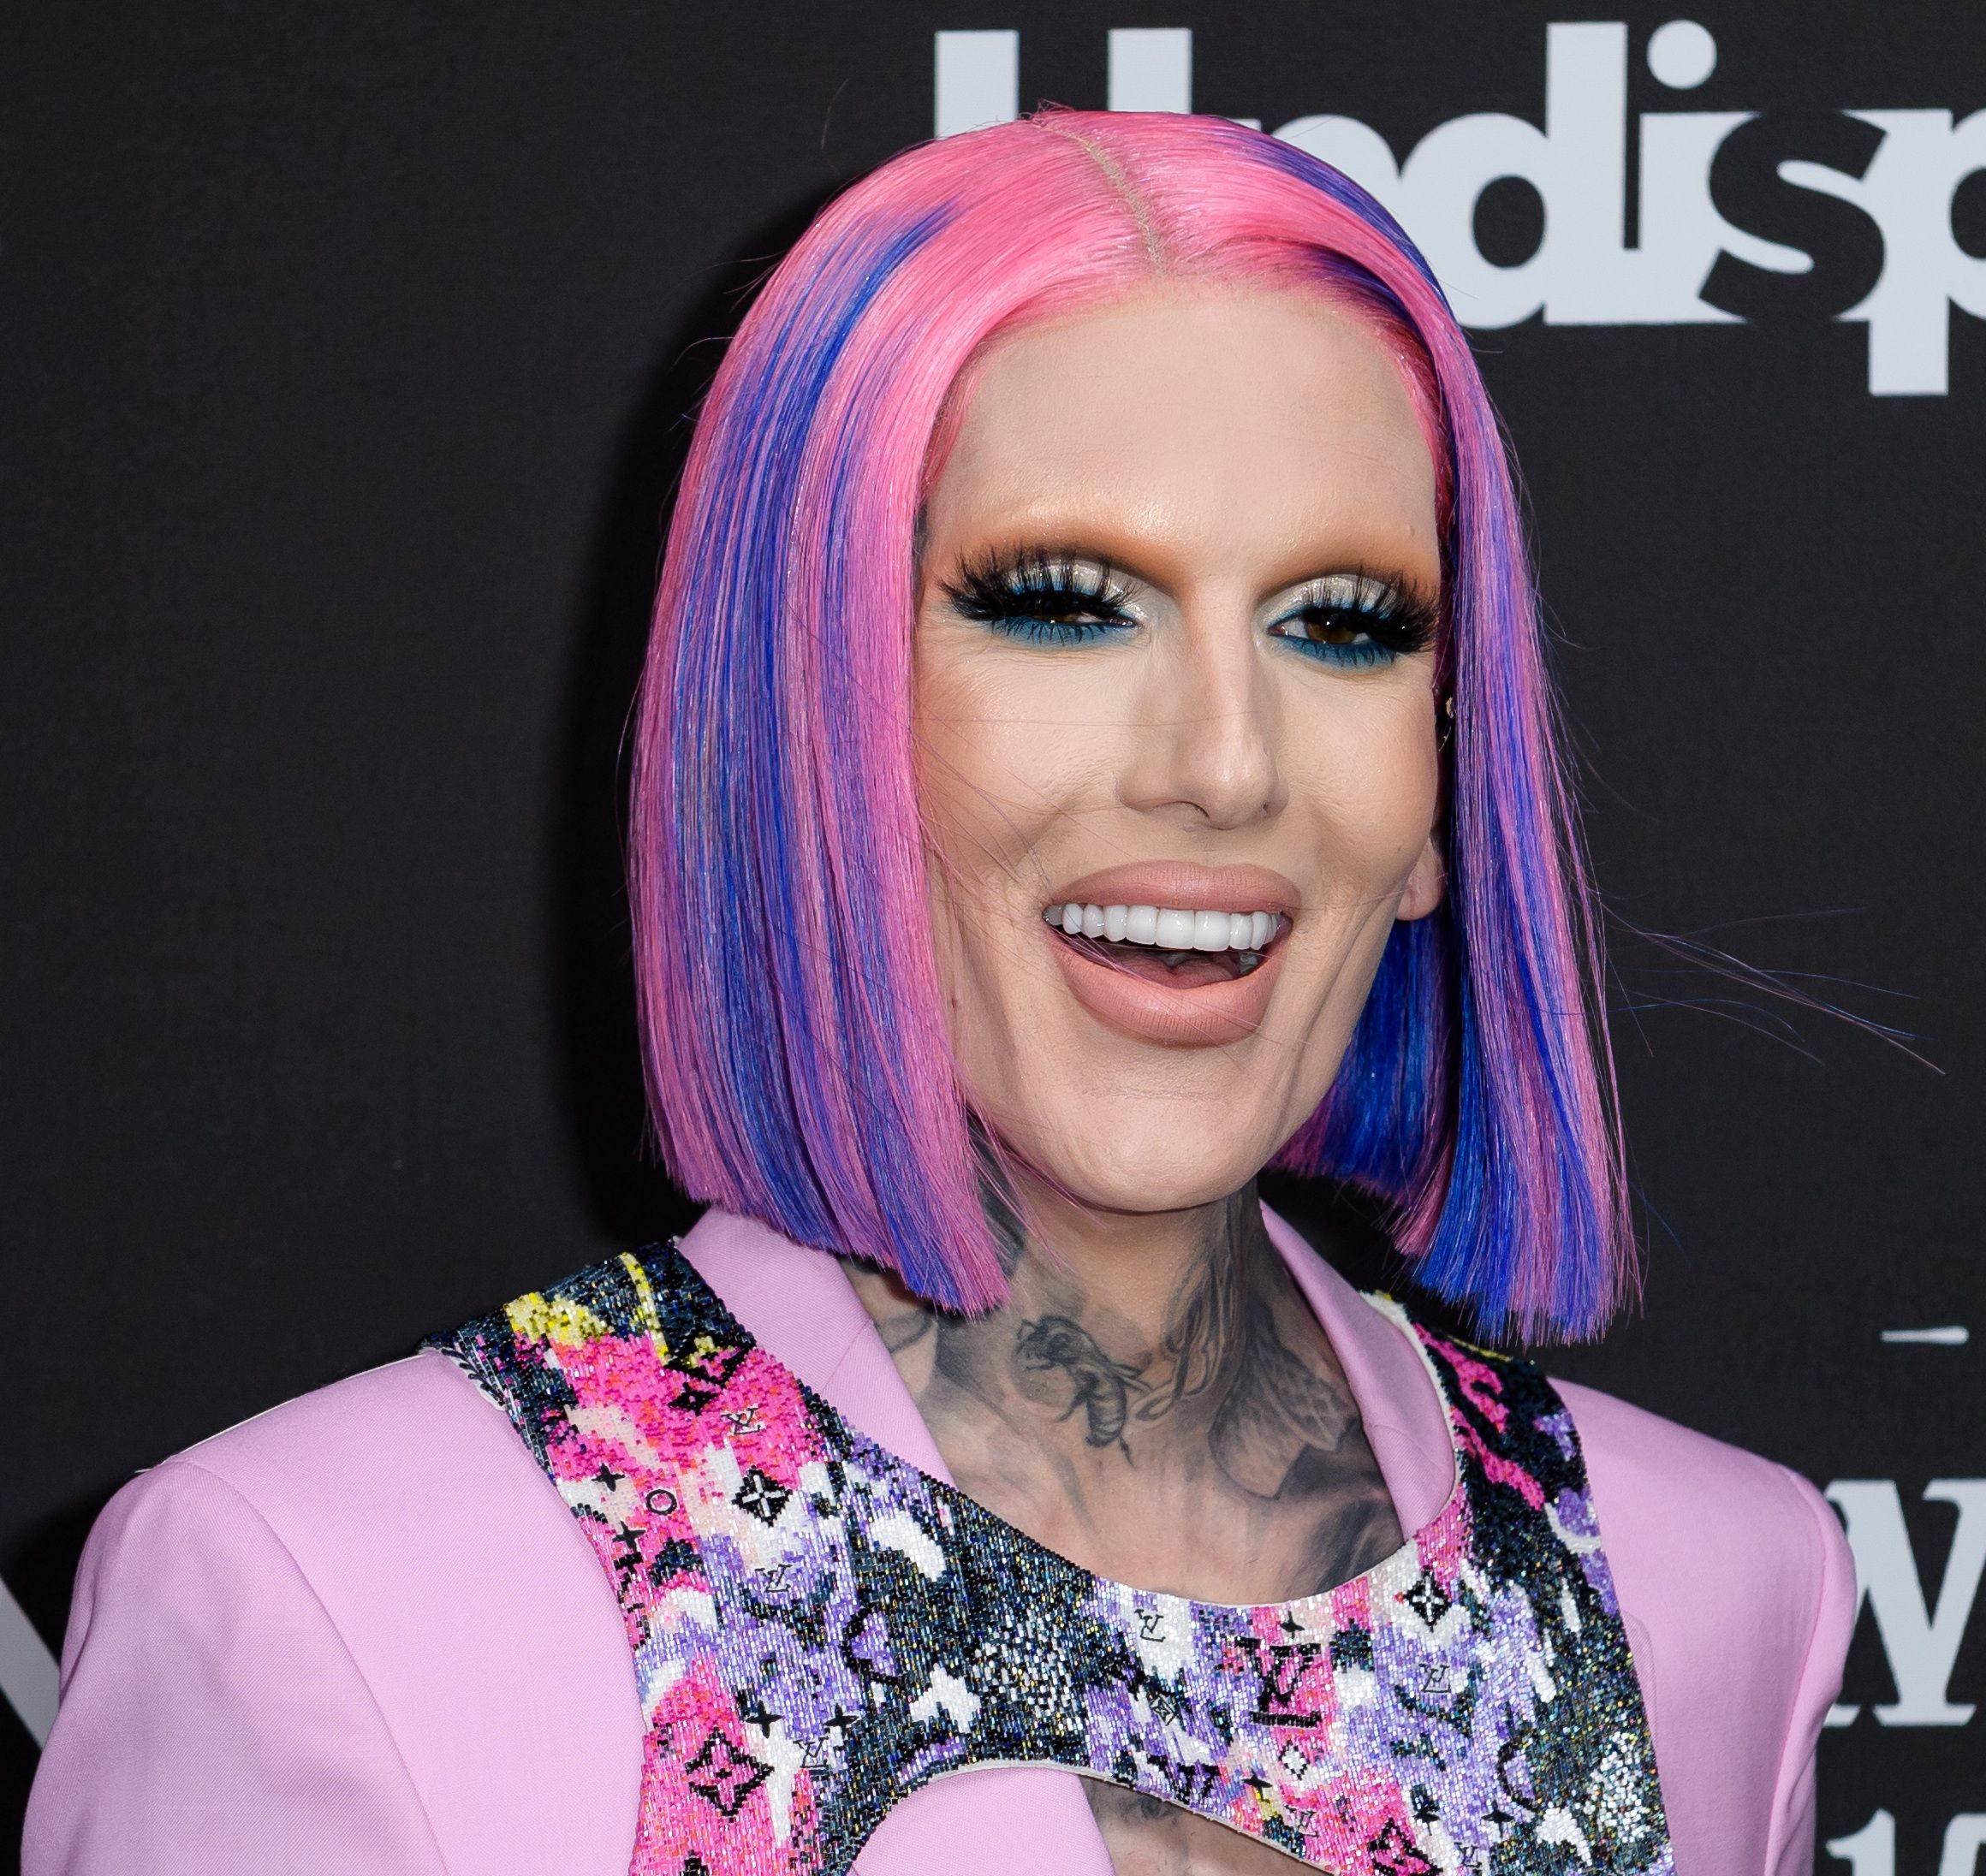 Who Is Jeffree Star And Why Is He In Wyoming?